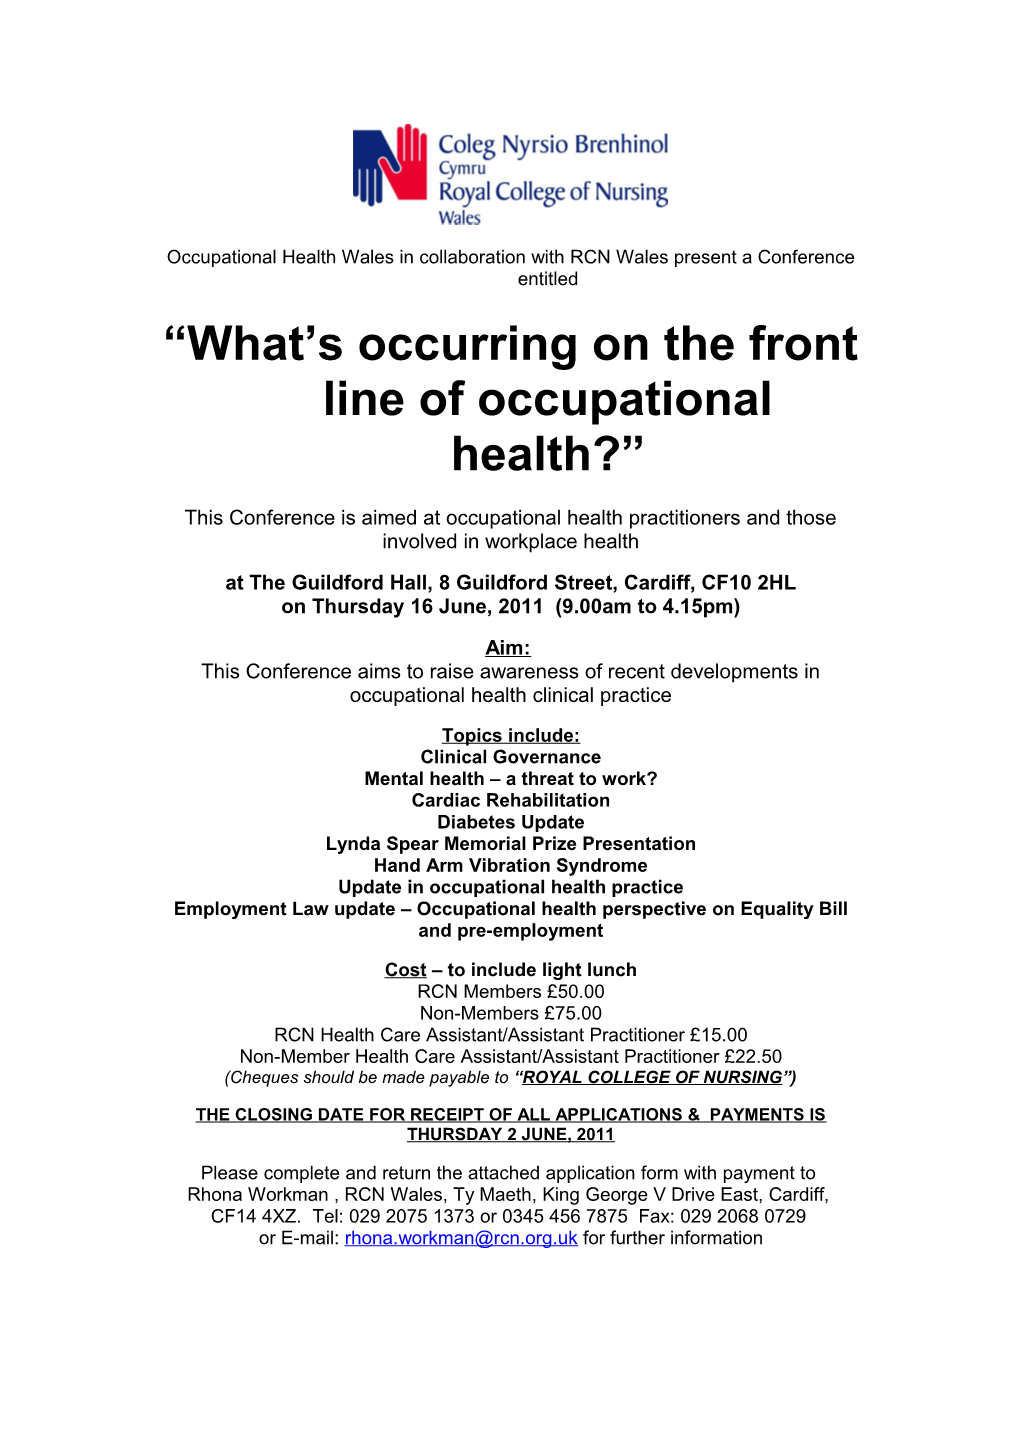 Occupational Health Wales in Collaboration with RCN Wales Present a Conference Entitled